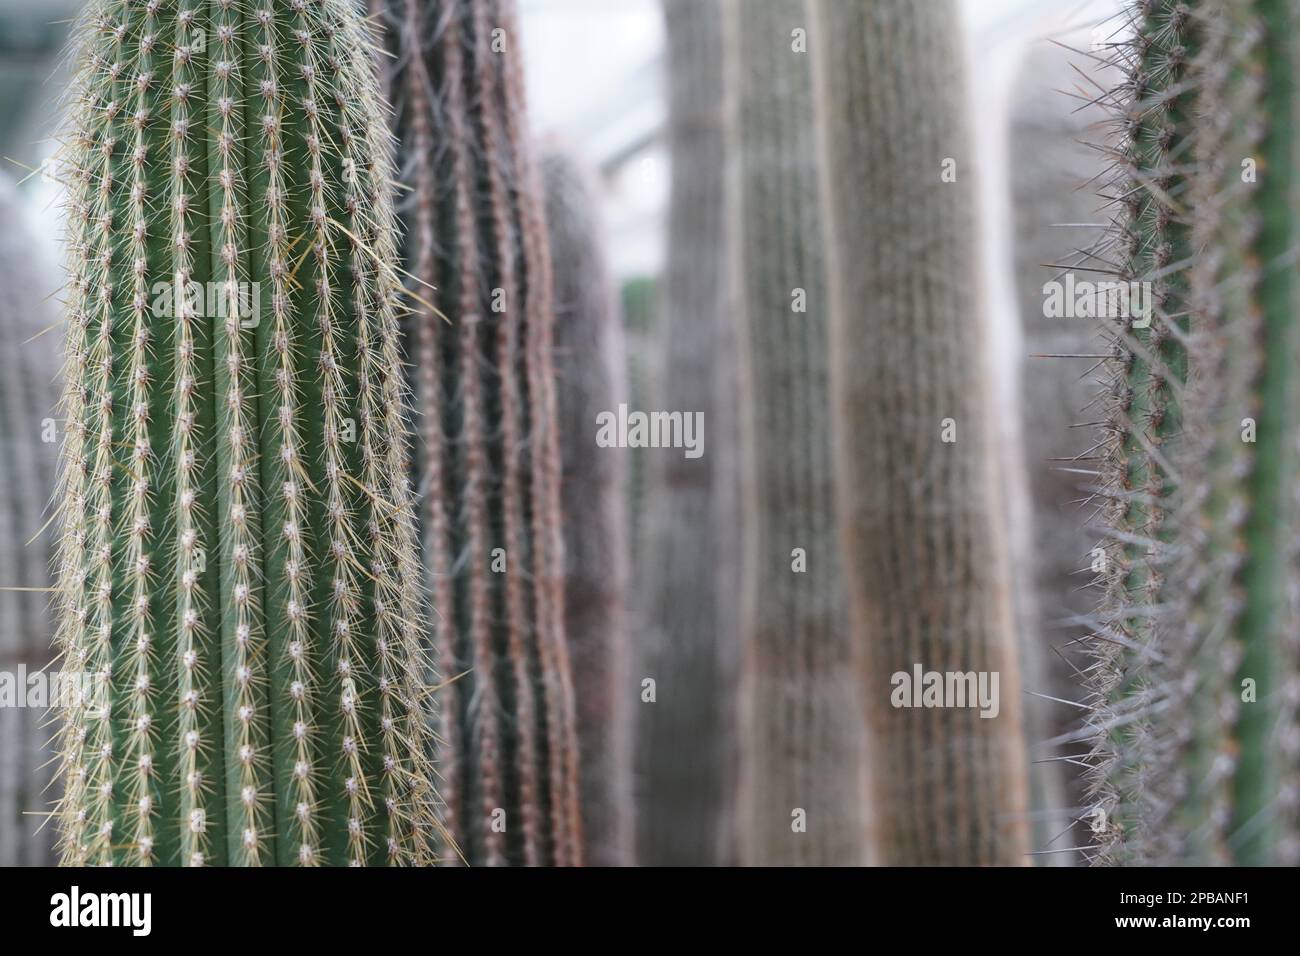 Various species of columnar cacti photographed as background. They have different spines, ribs and structure. The focus is on the foreground Stock Photo